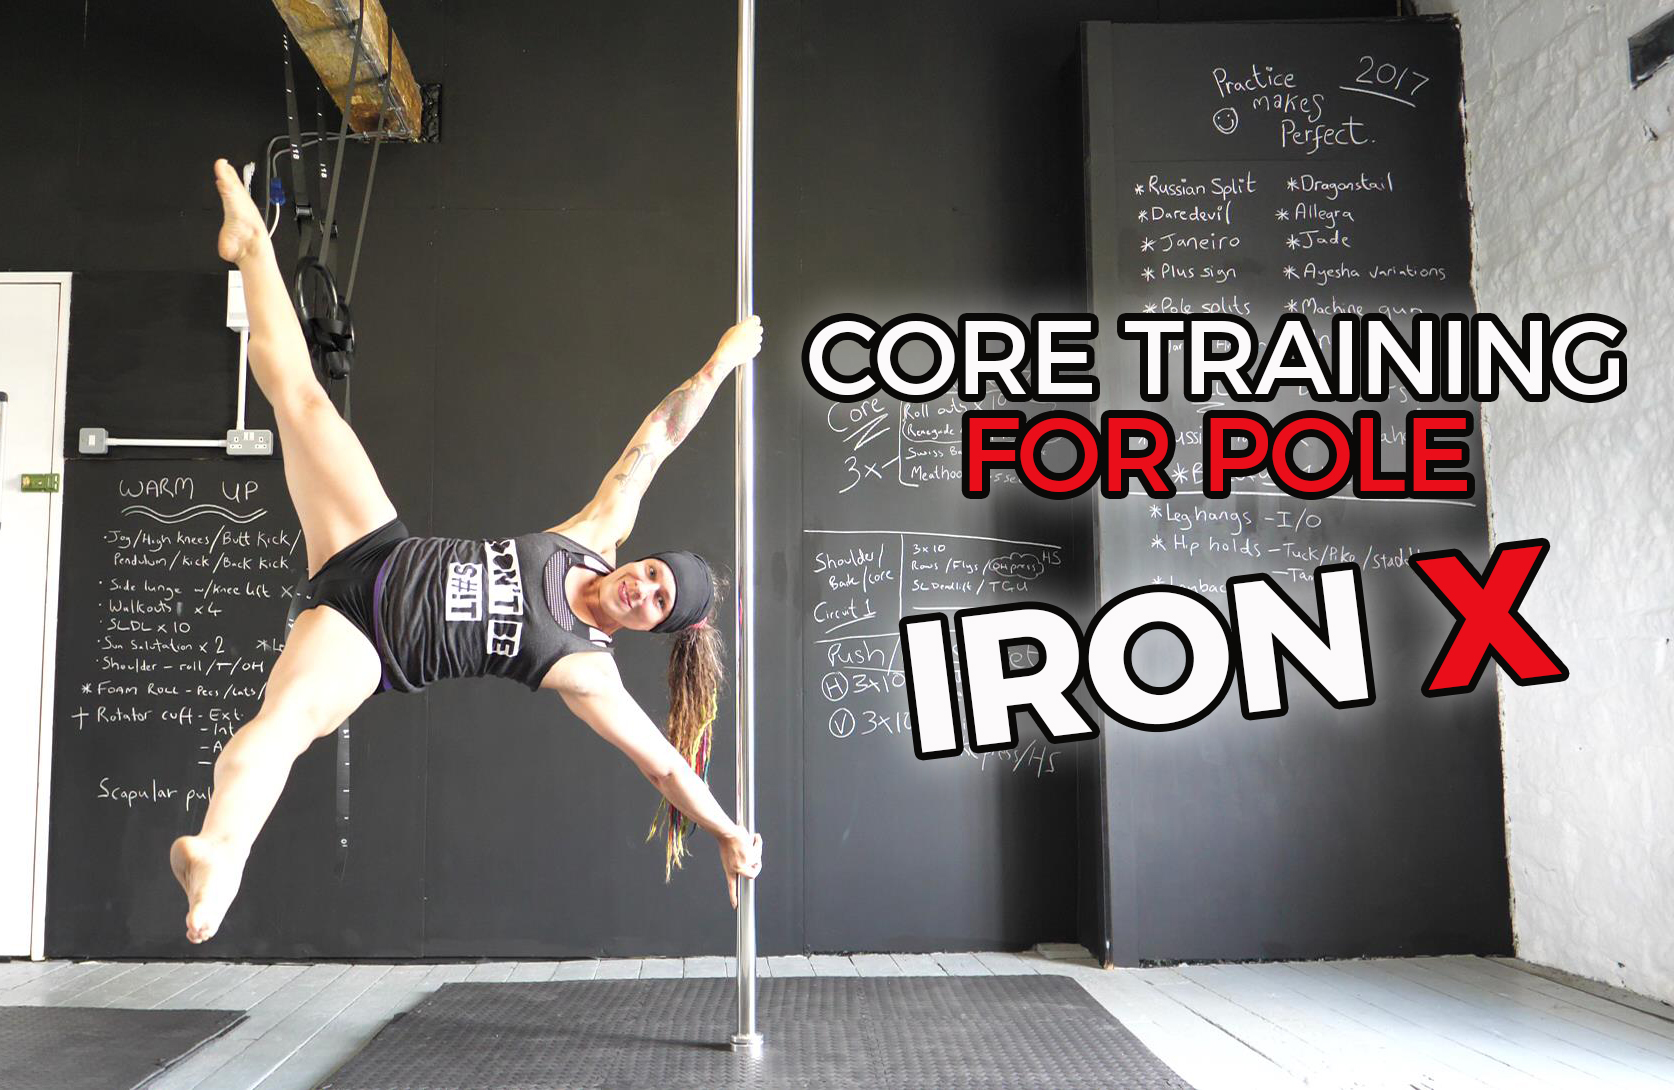 Core training for pole dancers (Part 3: Iron X fundamentals) – The